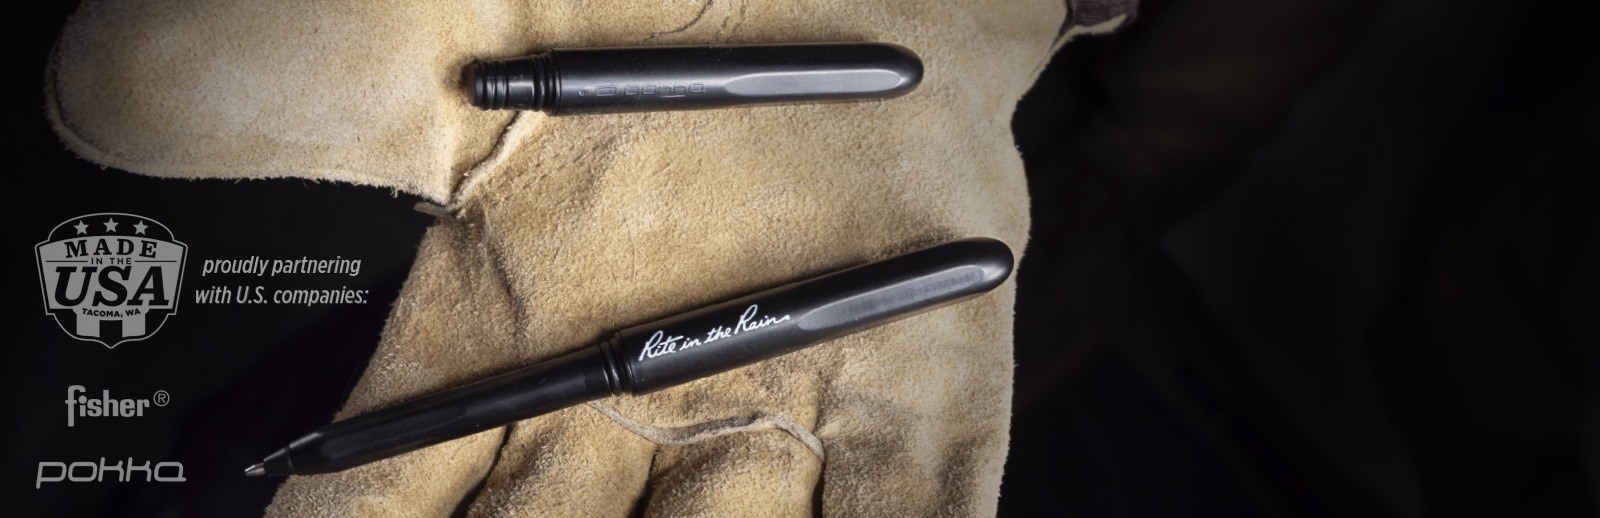 All-weather pocket pens made in usa, partnering with Fisher and pokka. 